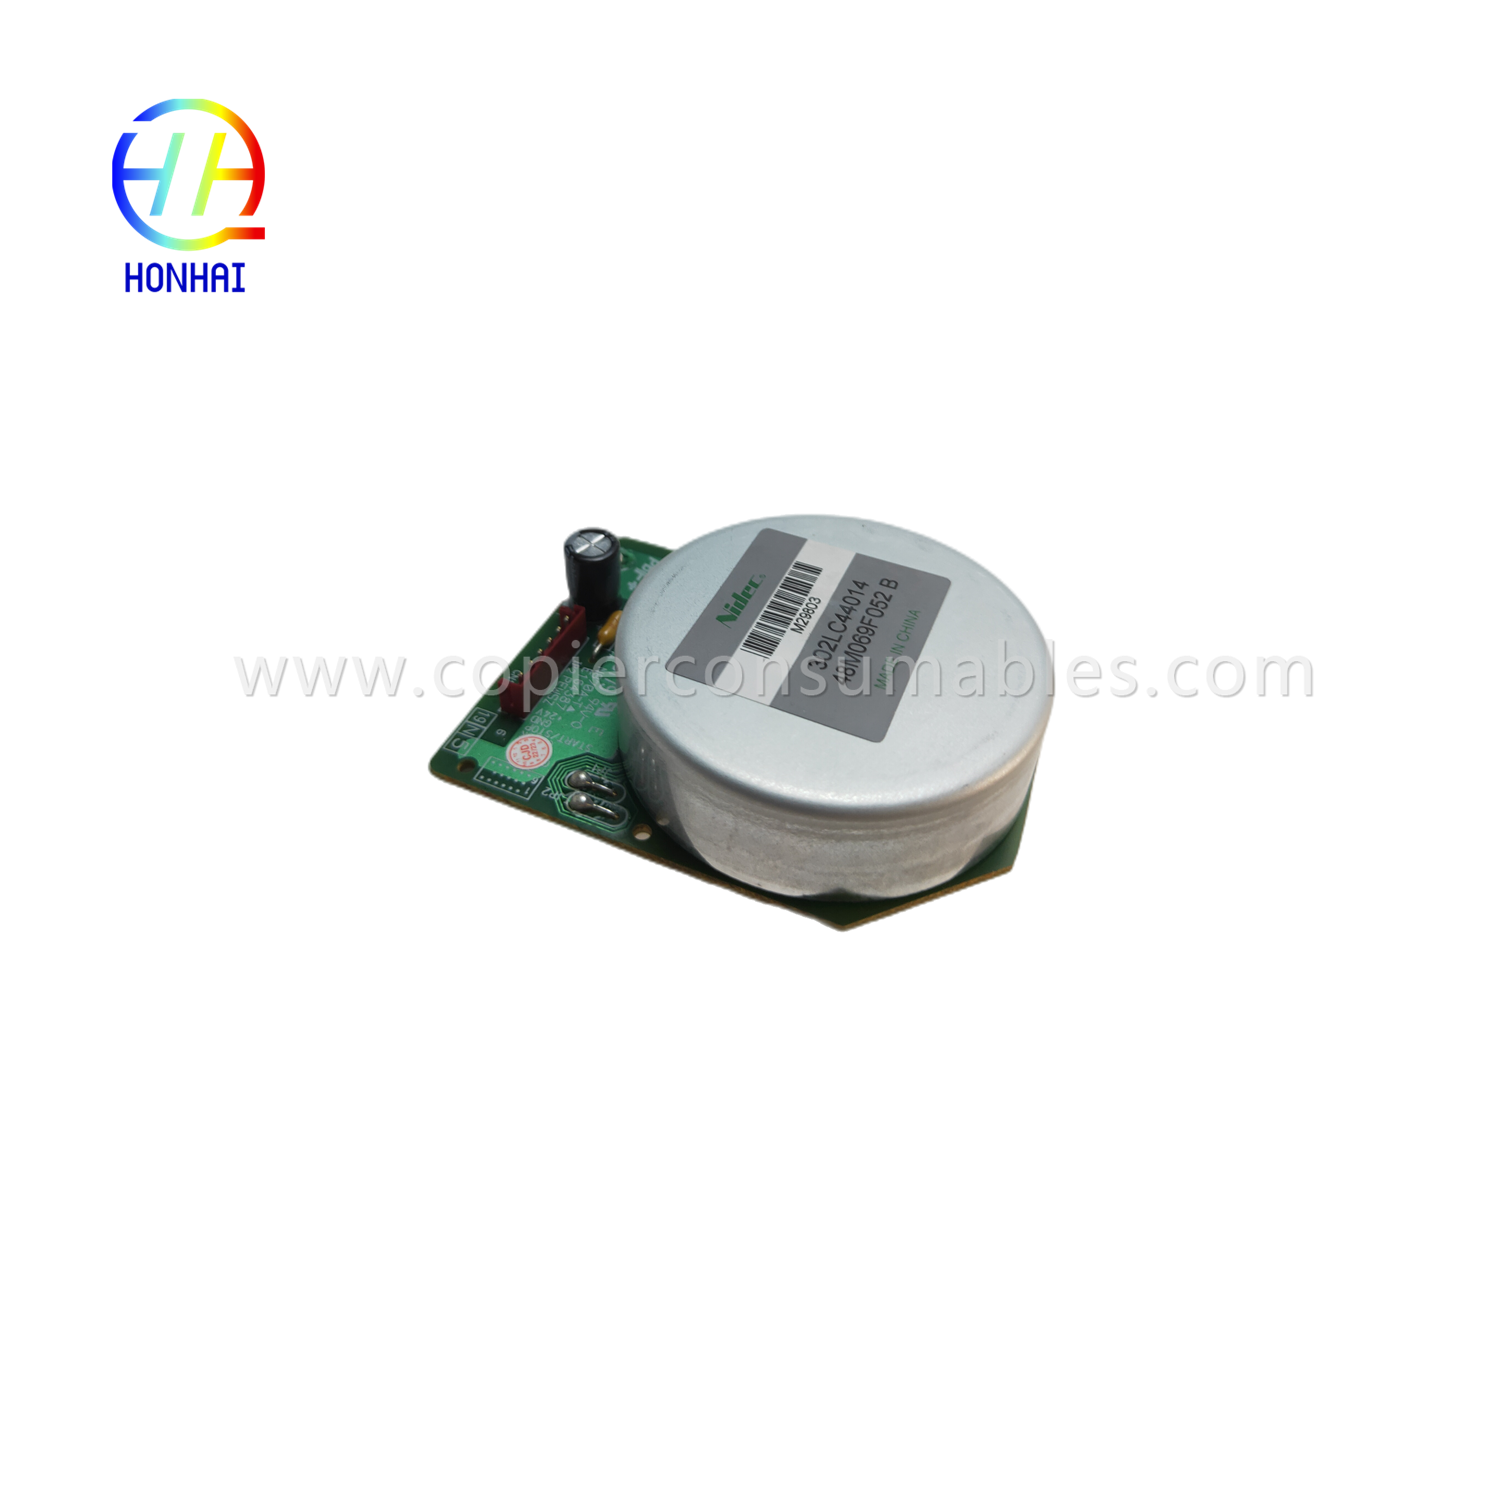 https://www.copierconsumables.com/motor-for-kyocera-ecosys-seri-parts-nr-302lc44014-48m069f052-b-product/